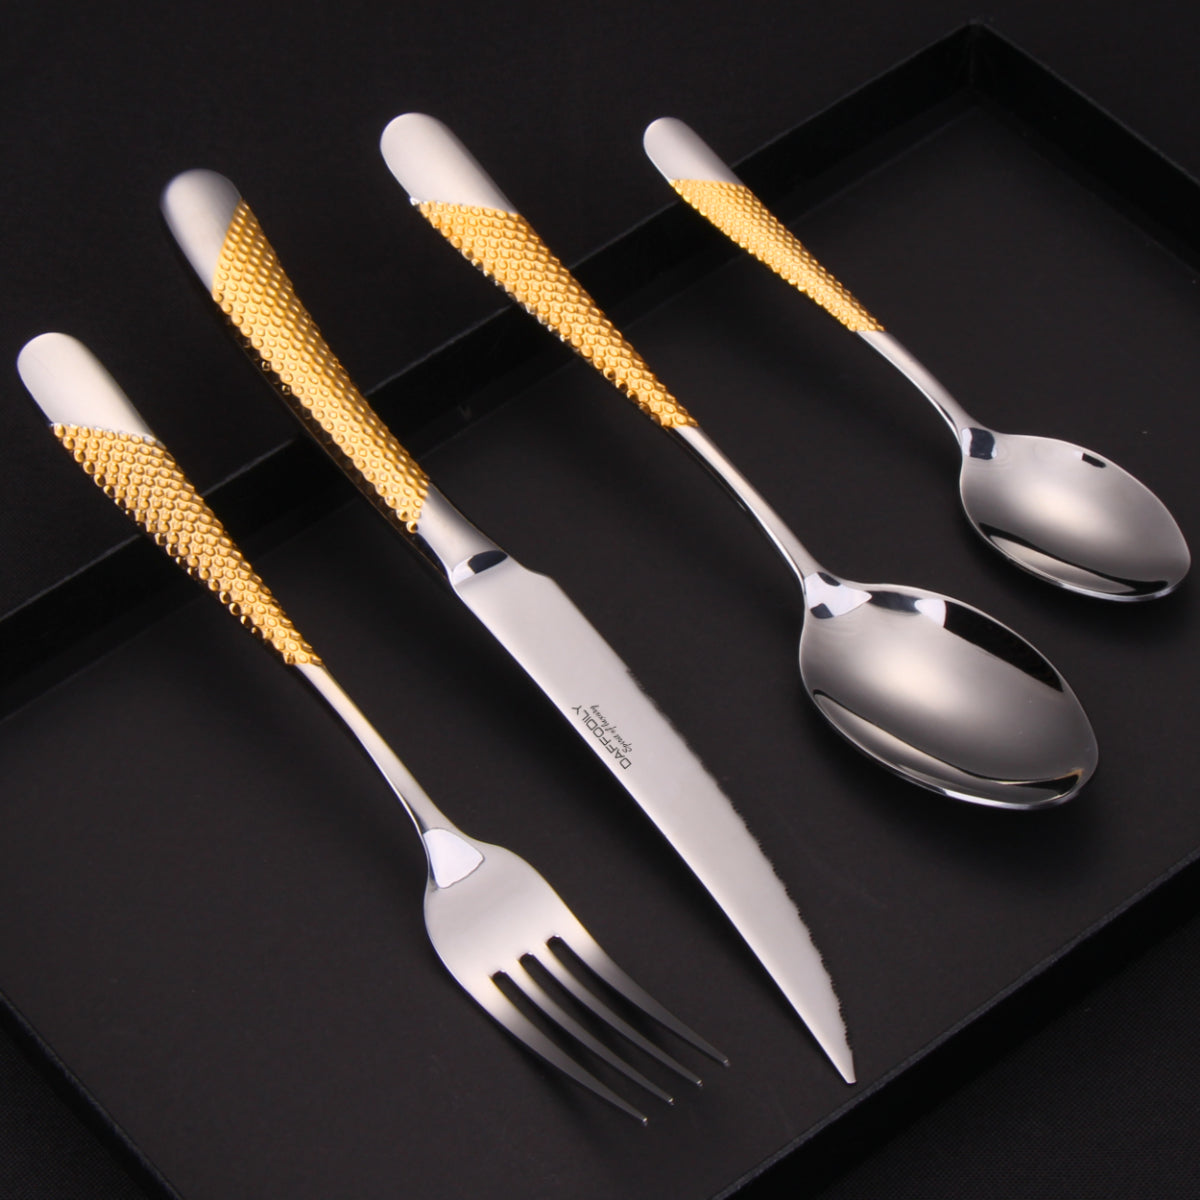 Sophisticated gold cutlery set to elevate your table setting